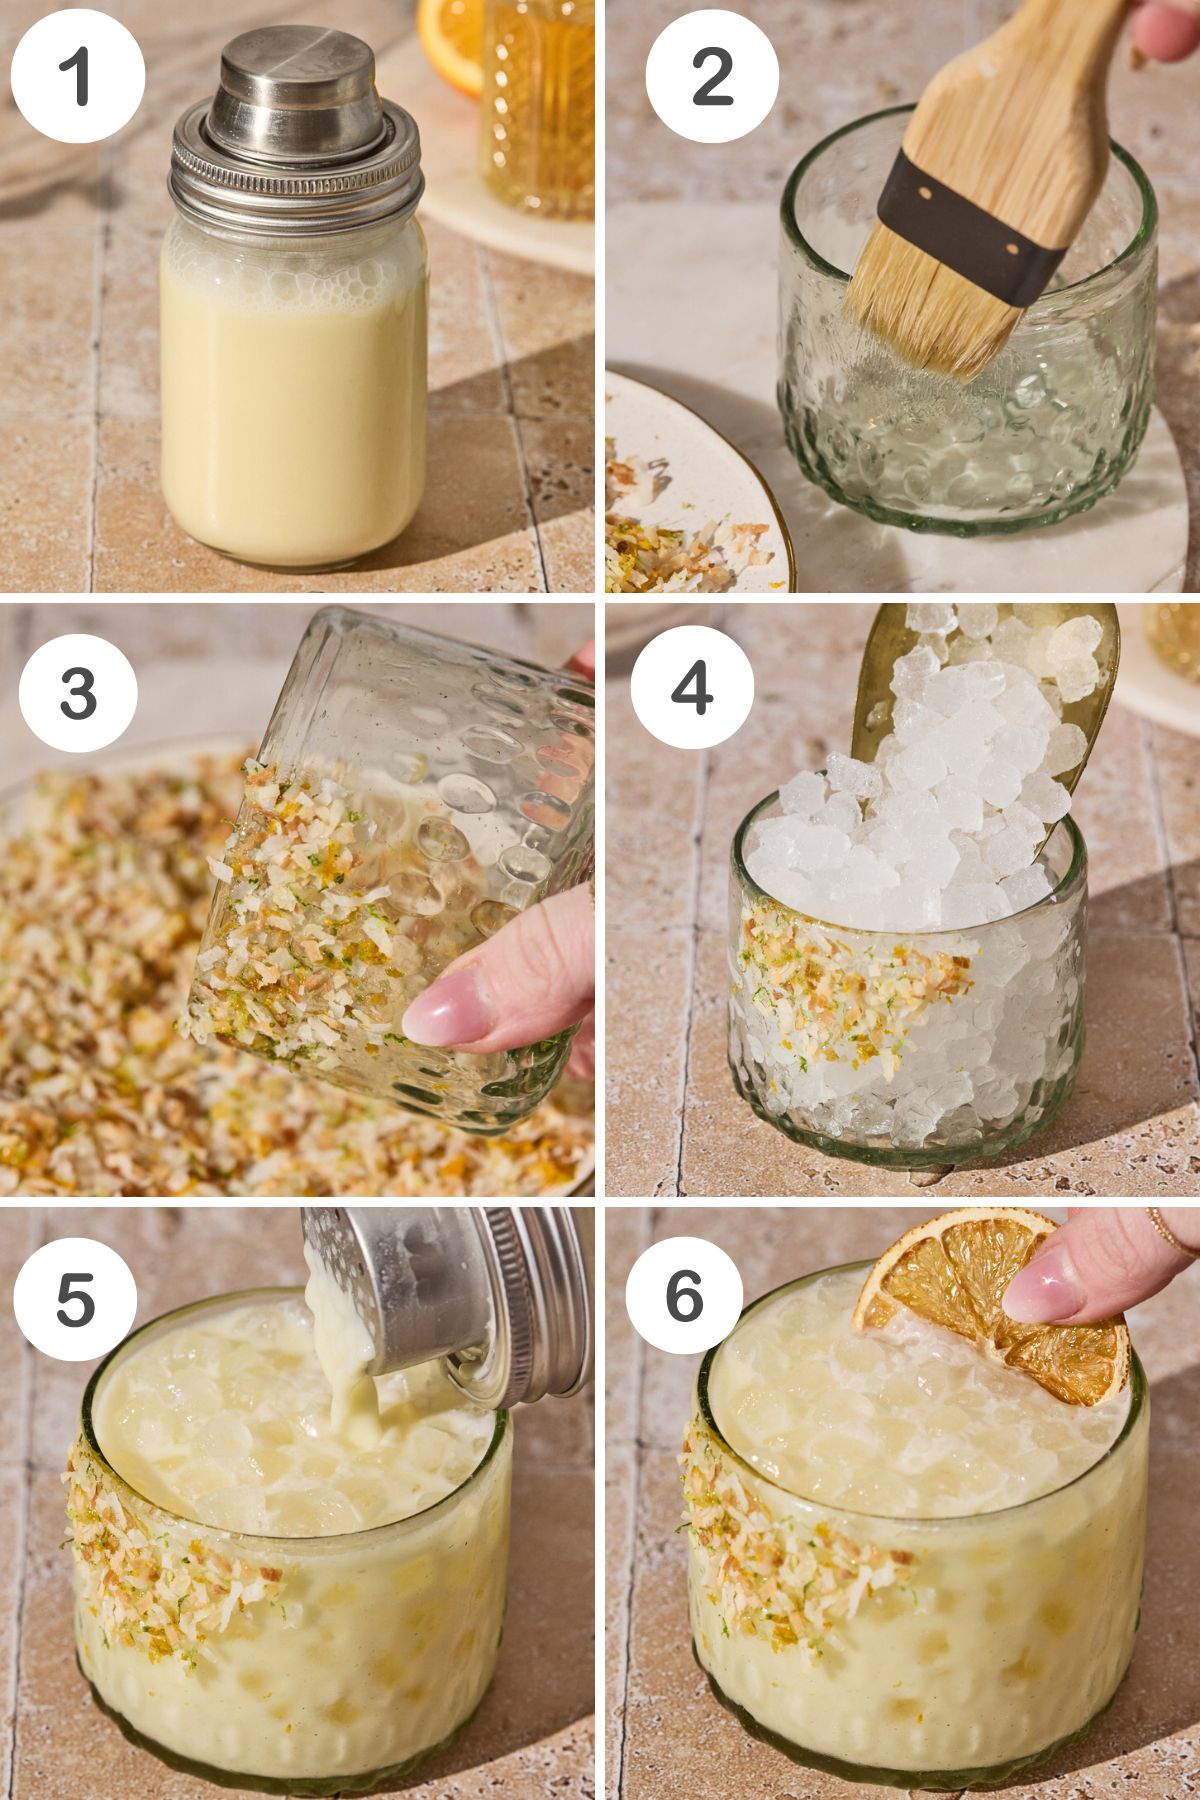 numbered step by step photos showing how to make this drink